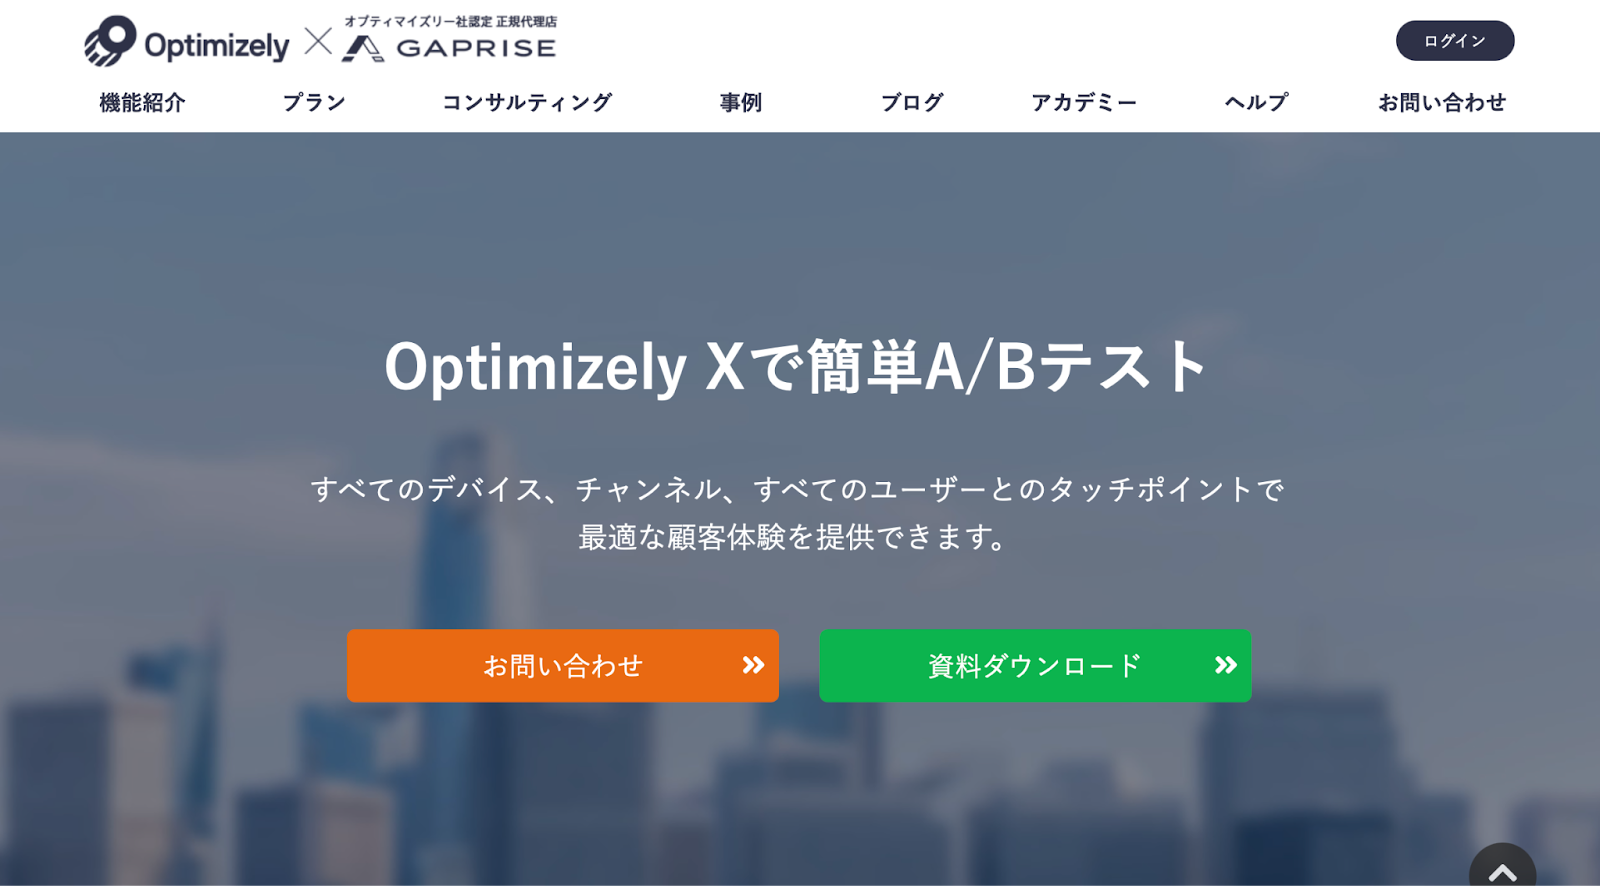 Optimaizely X